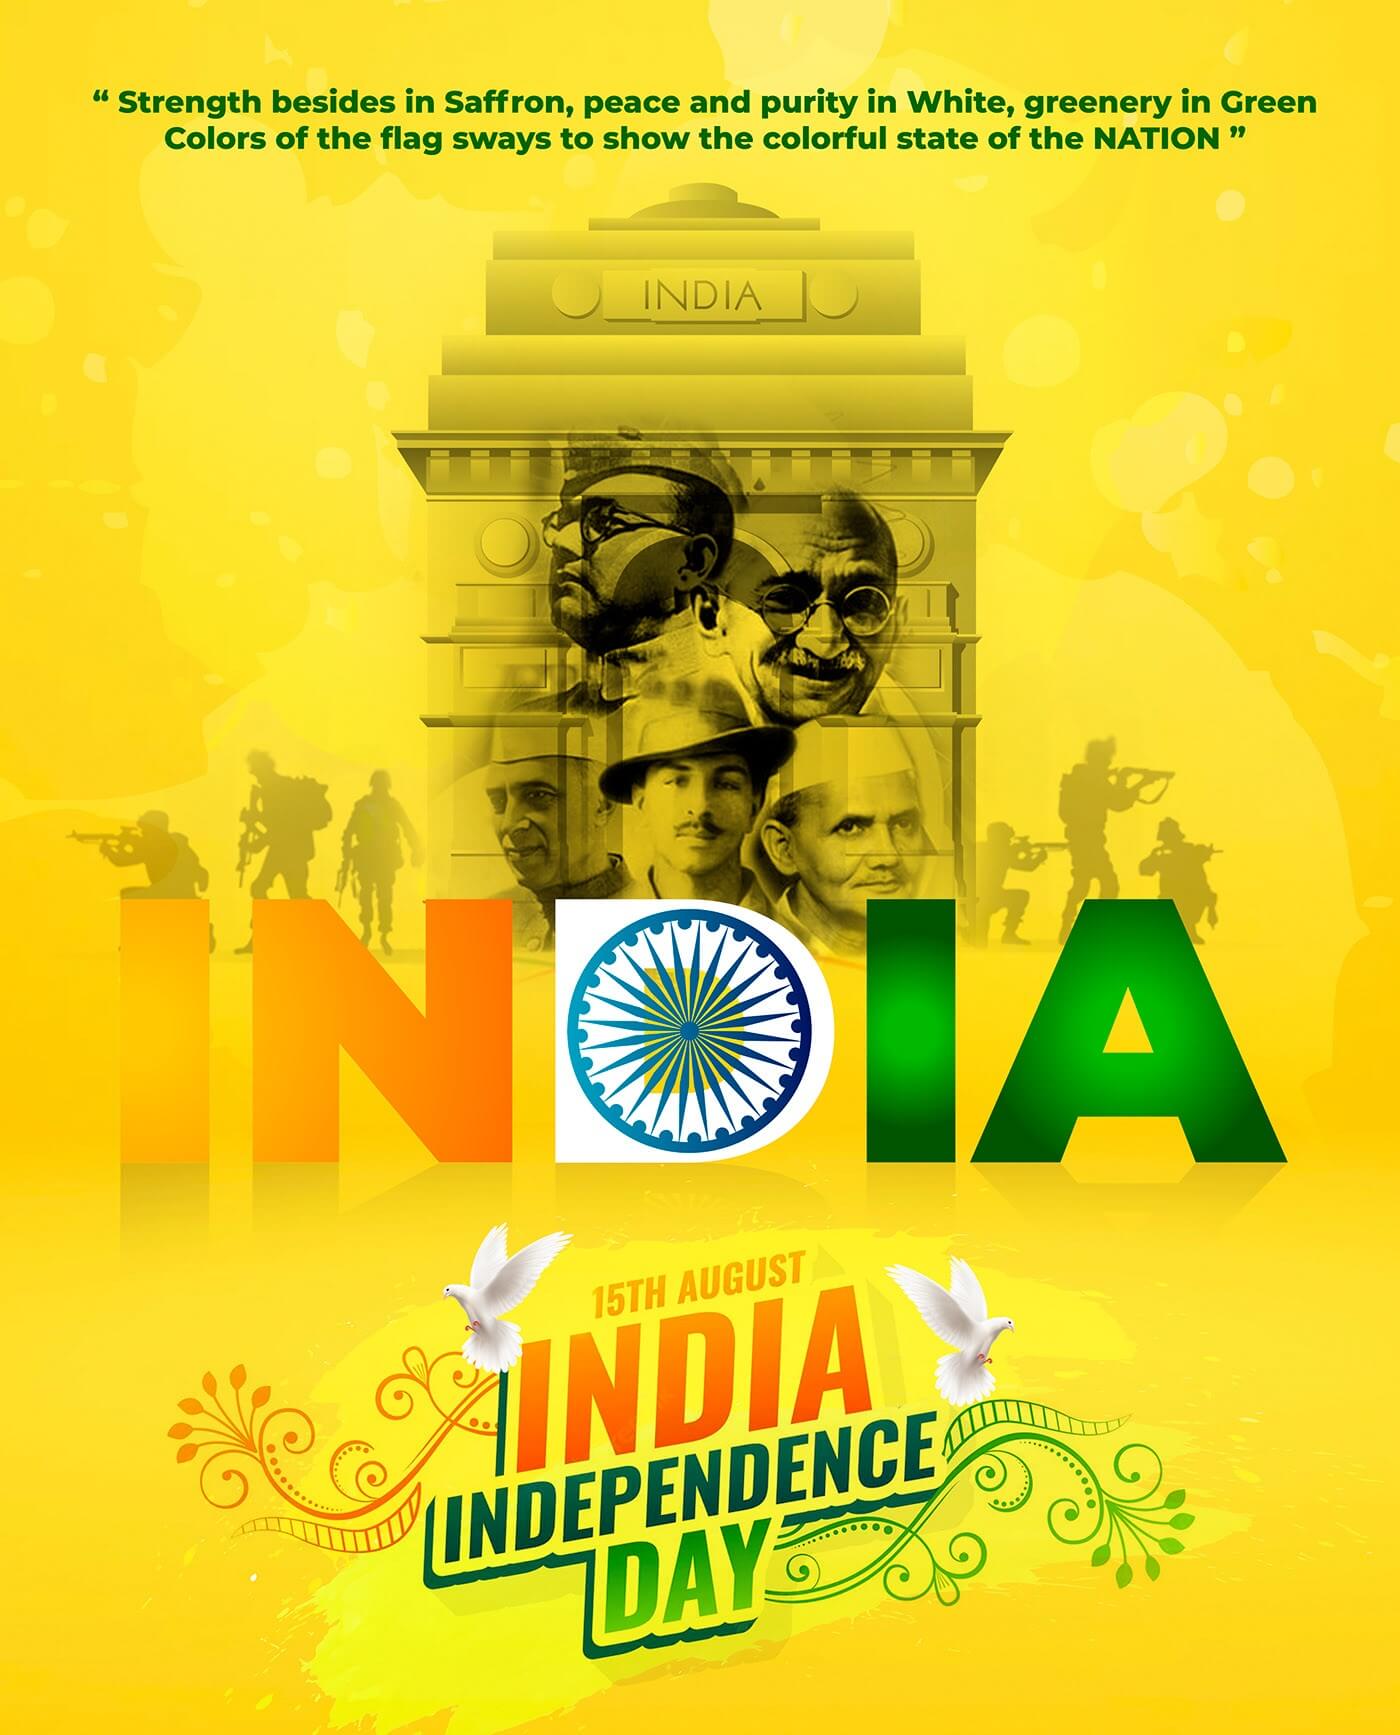 independence day greeting card